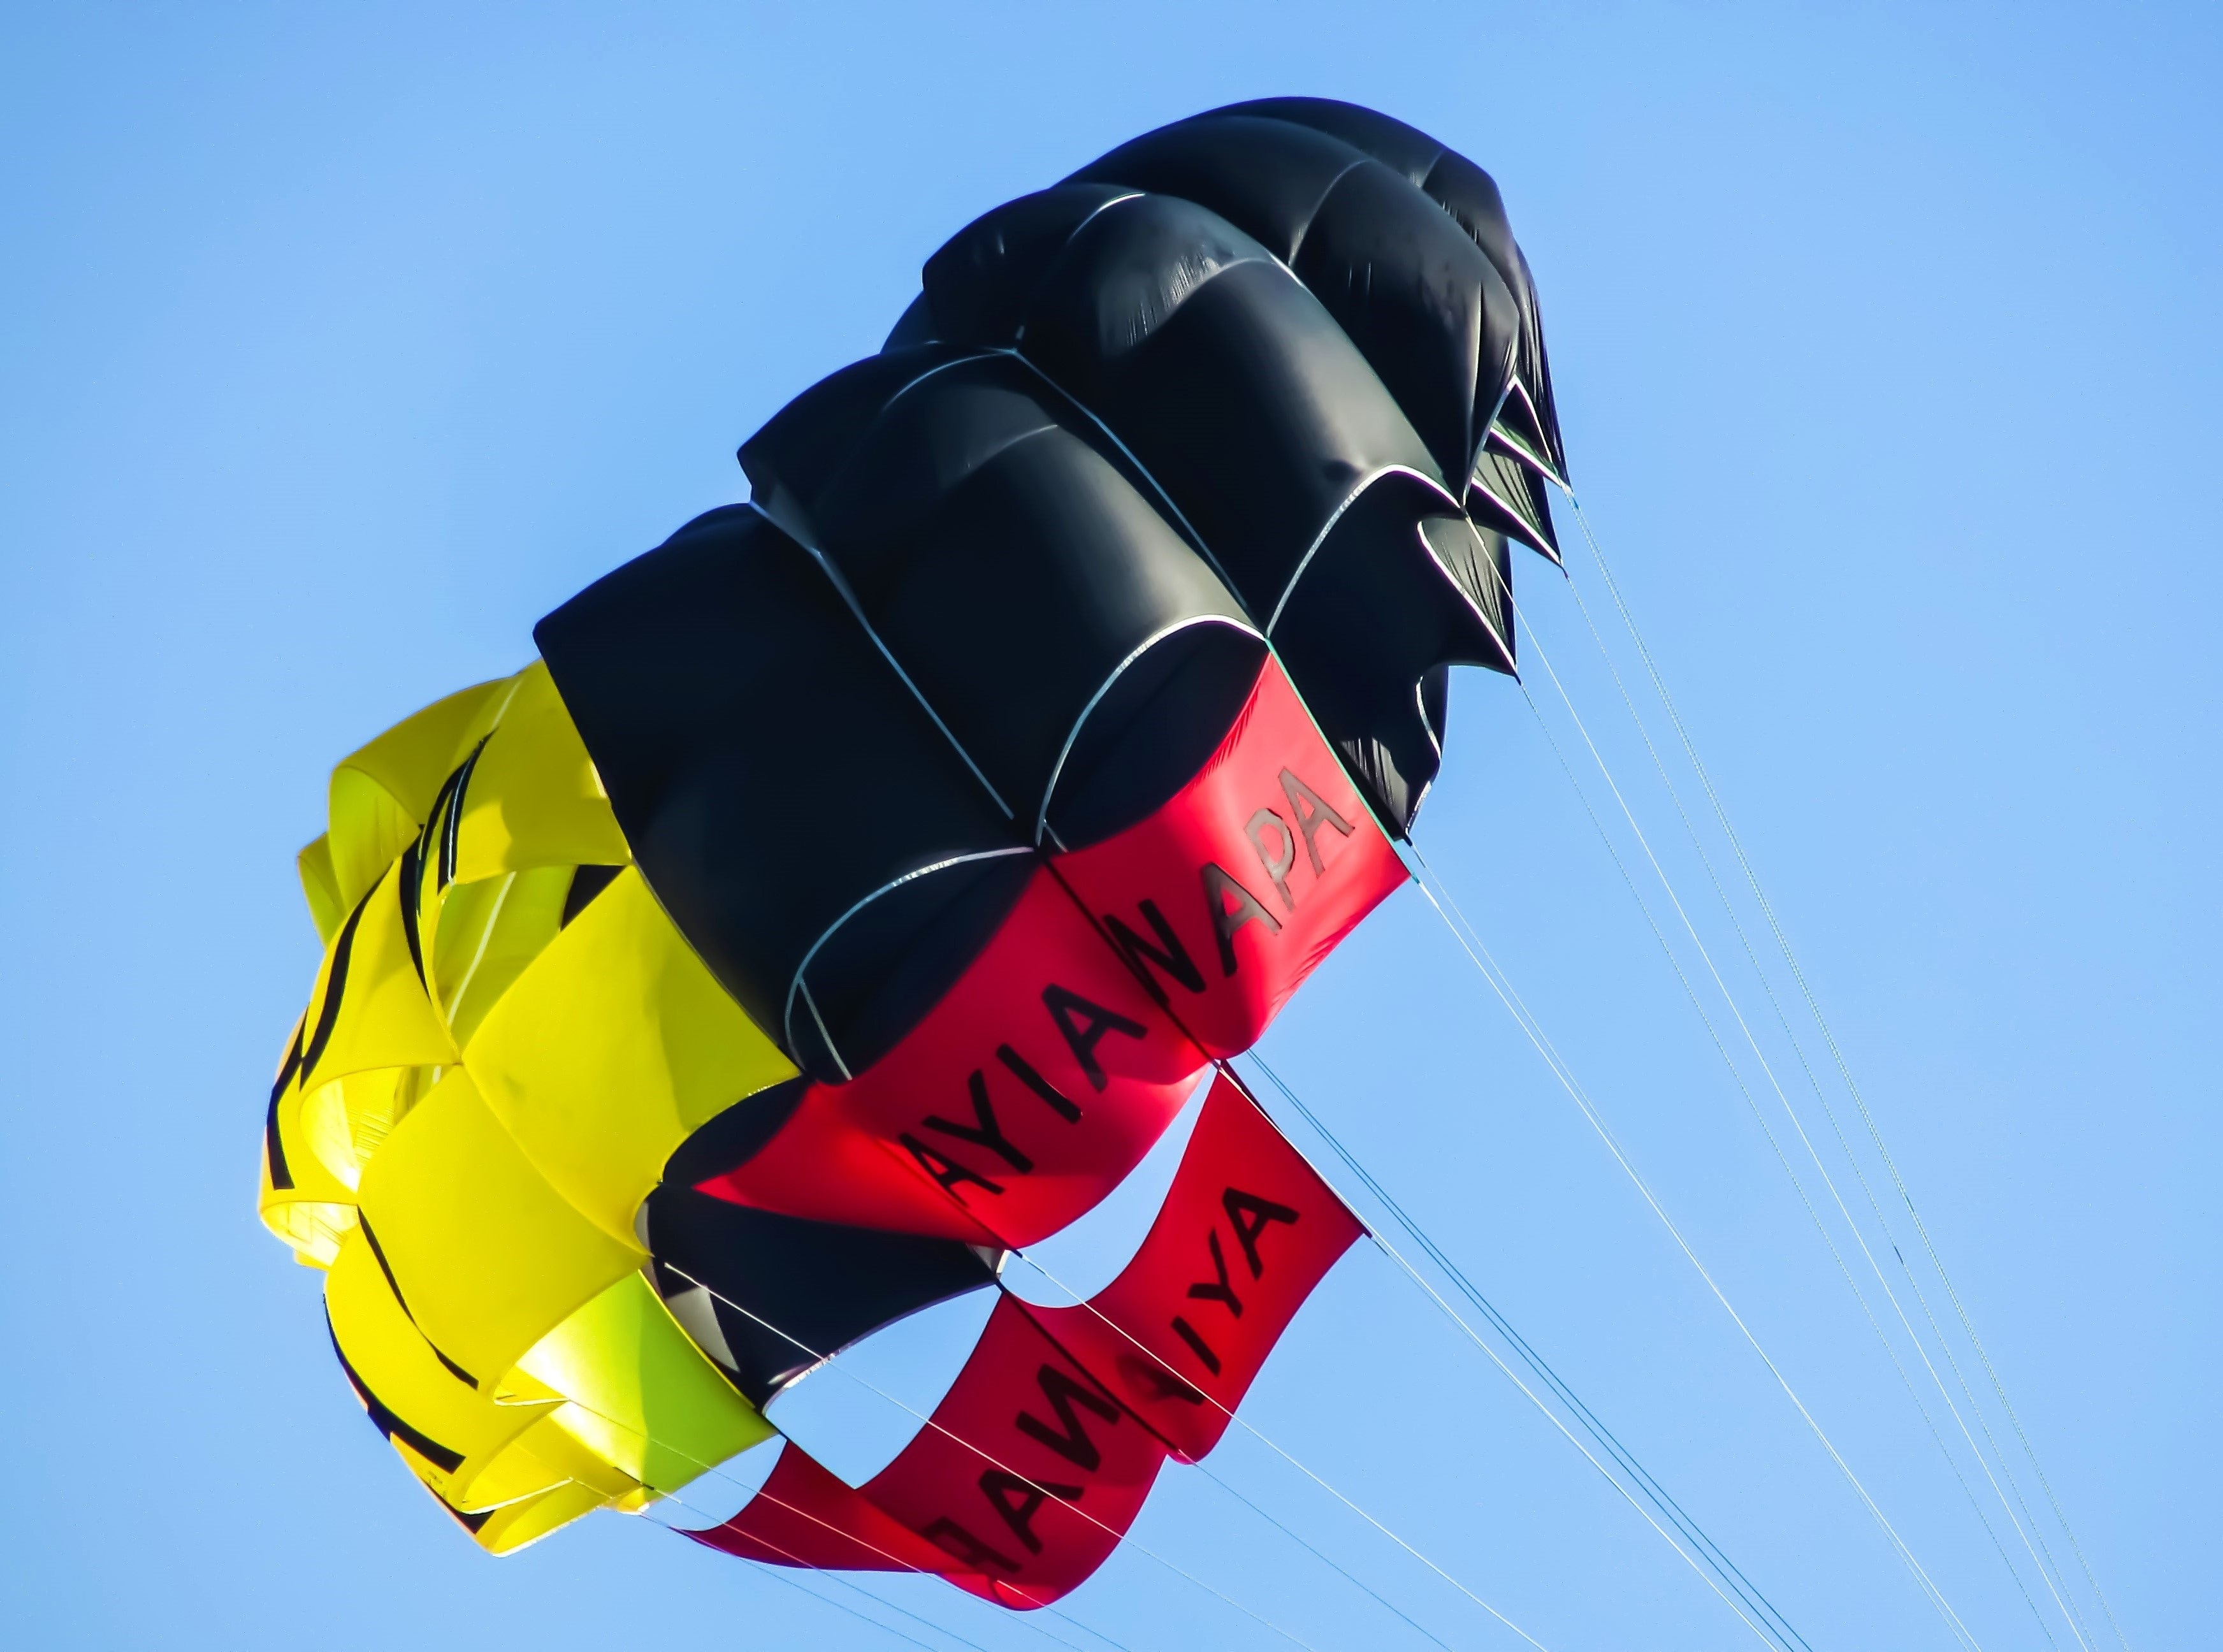 red yellow and black parachute